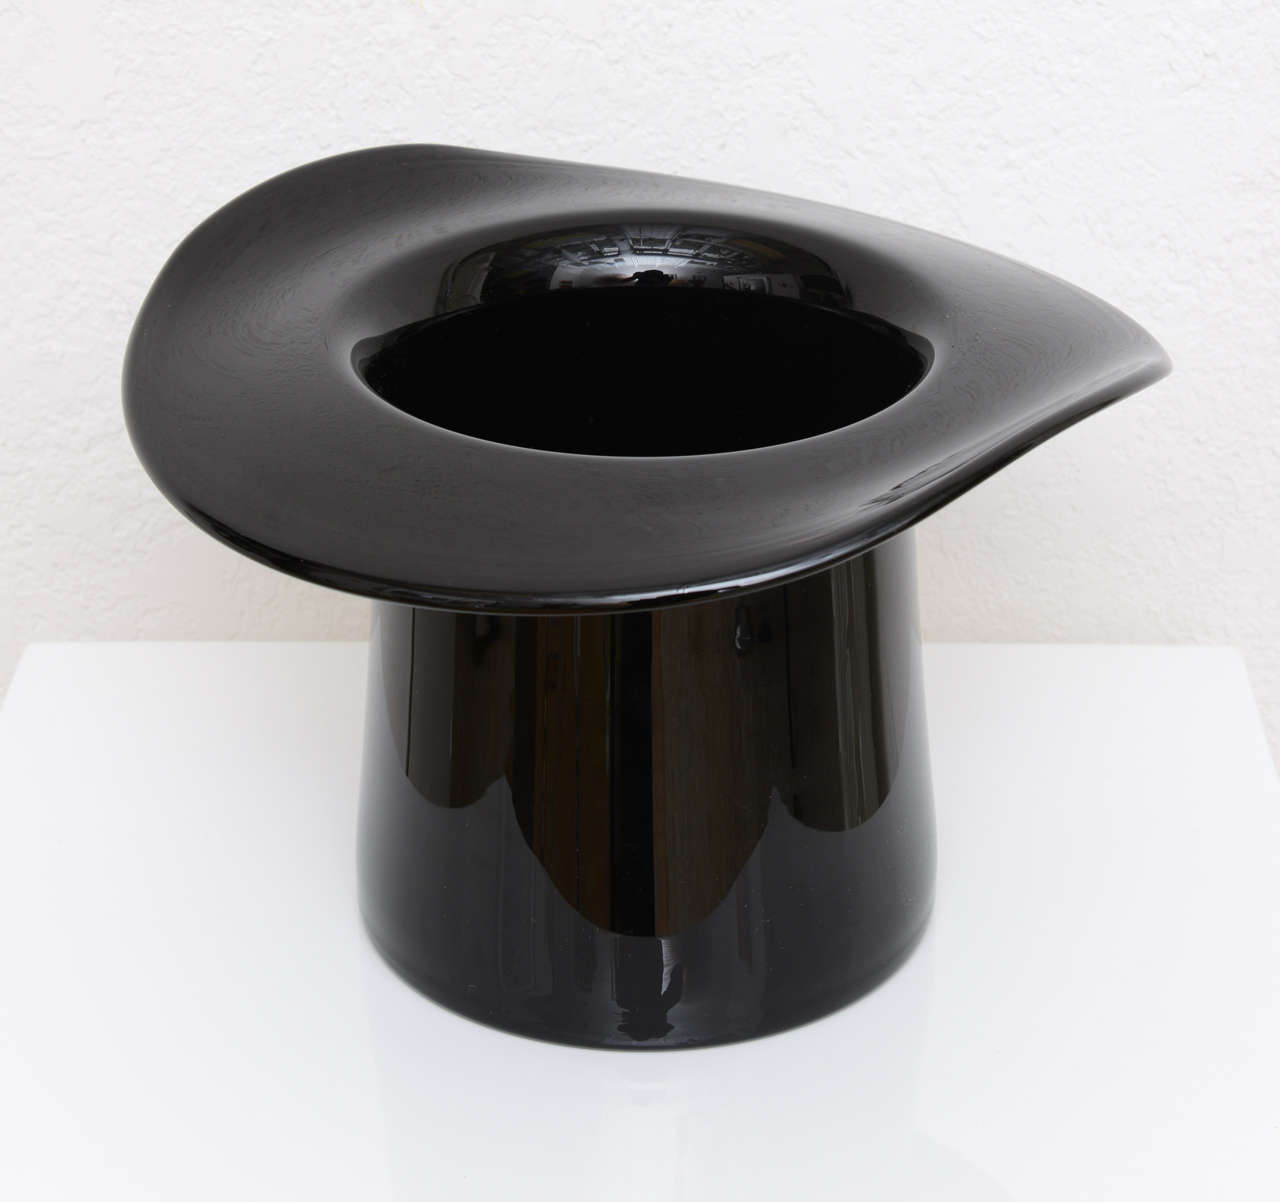 Delightful Murano black top hat ice bucket or bottle holder.

Please feel free to contact us directly for any additional information or a shipping quote by clicking 